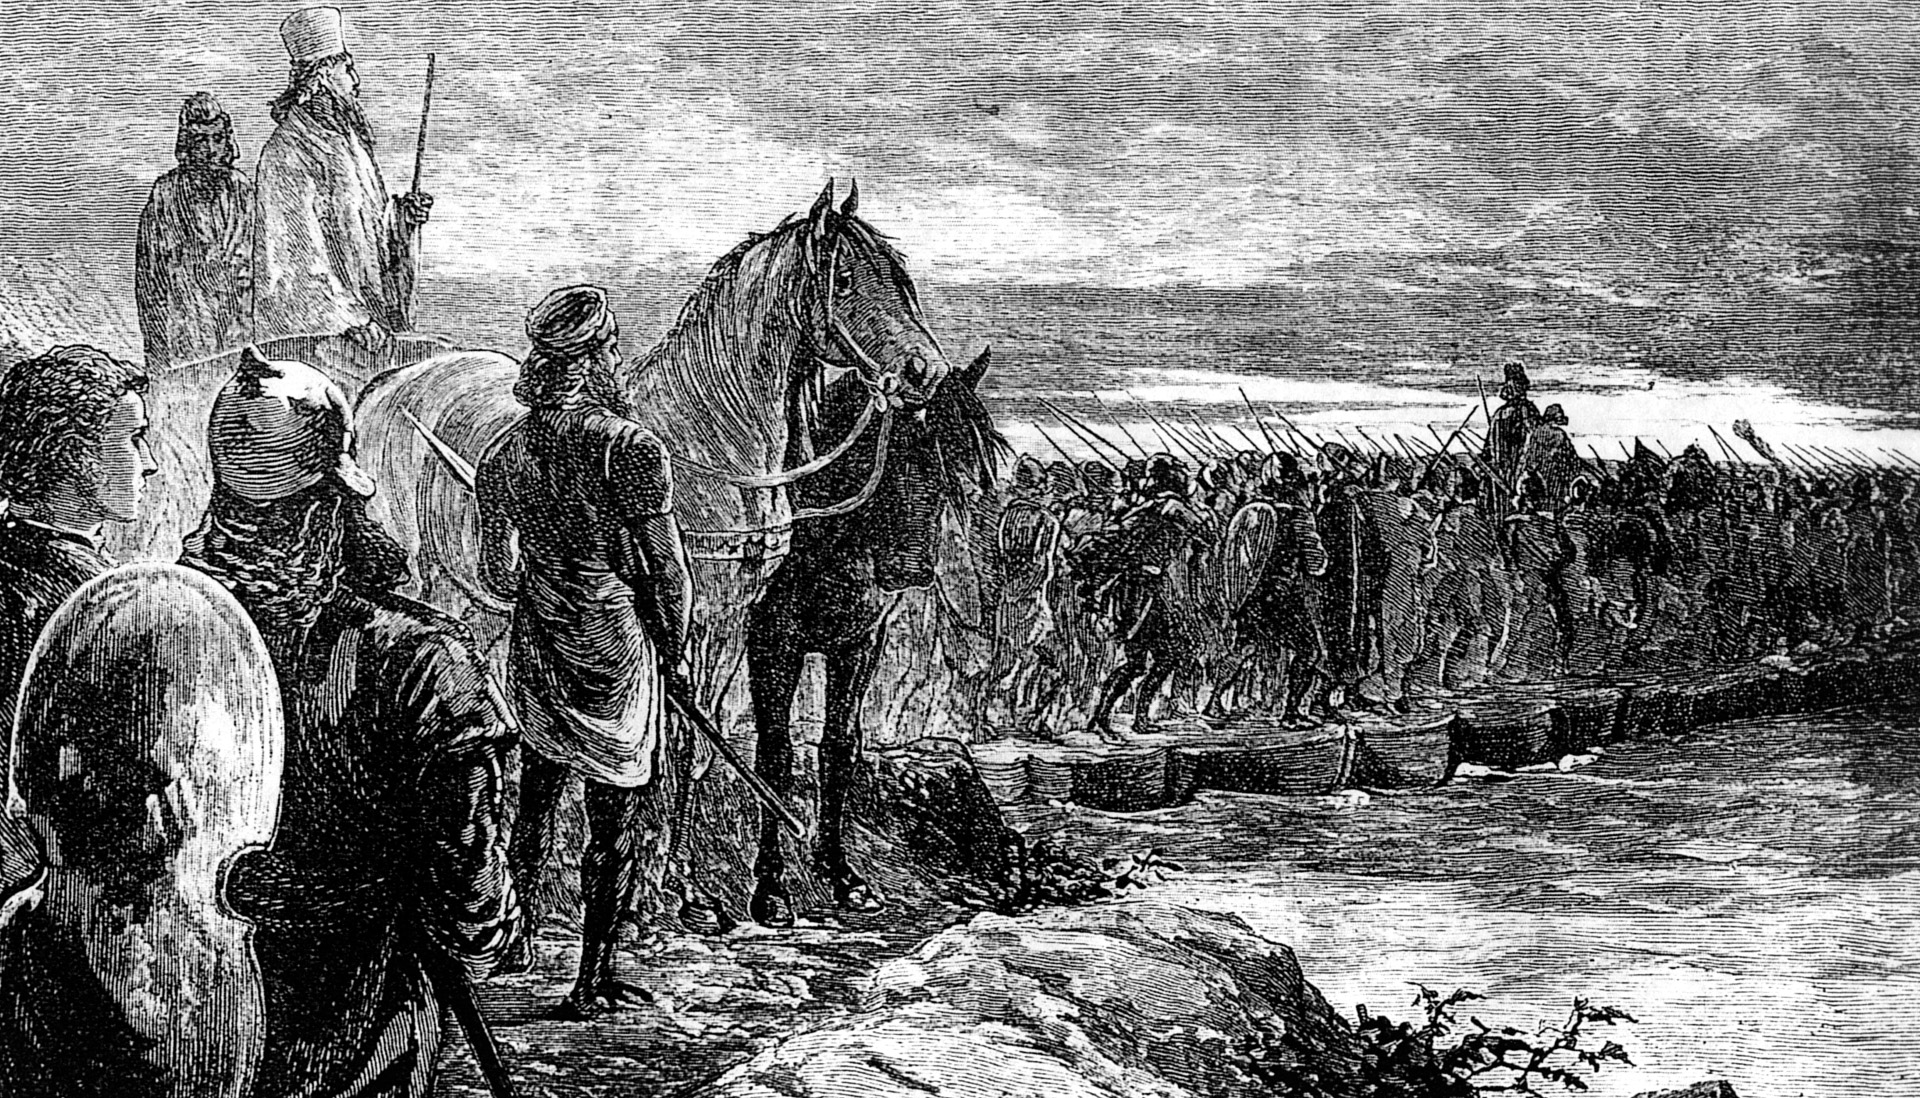 Xerxes’ Persian army achieved an engineering marvel by crossing the Hellespont on two long pontoon bridges.